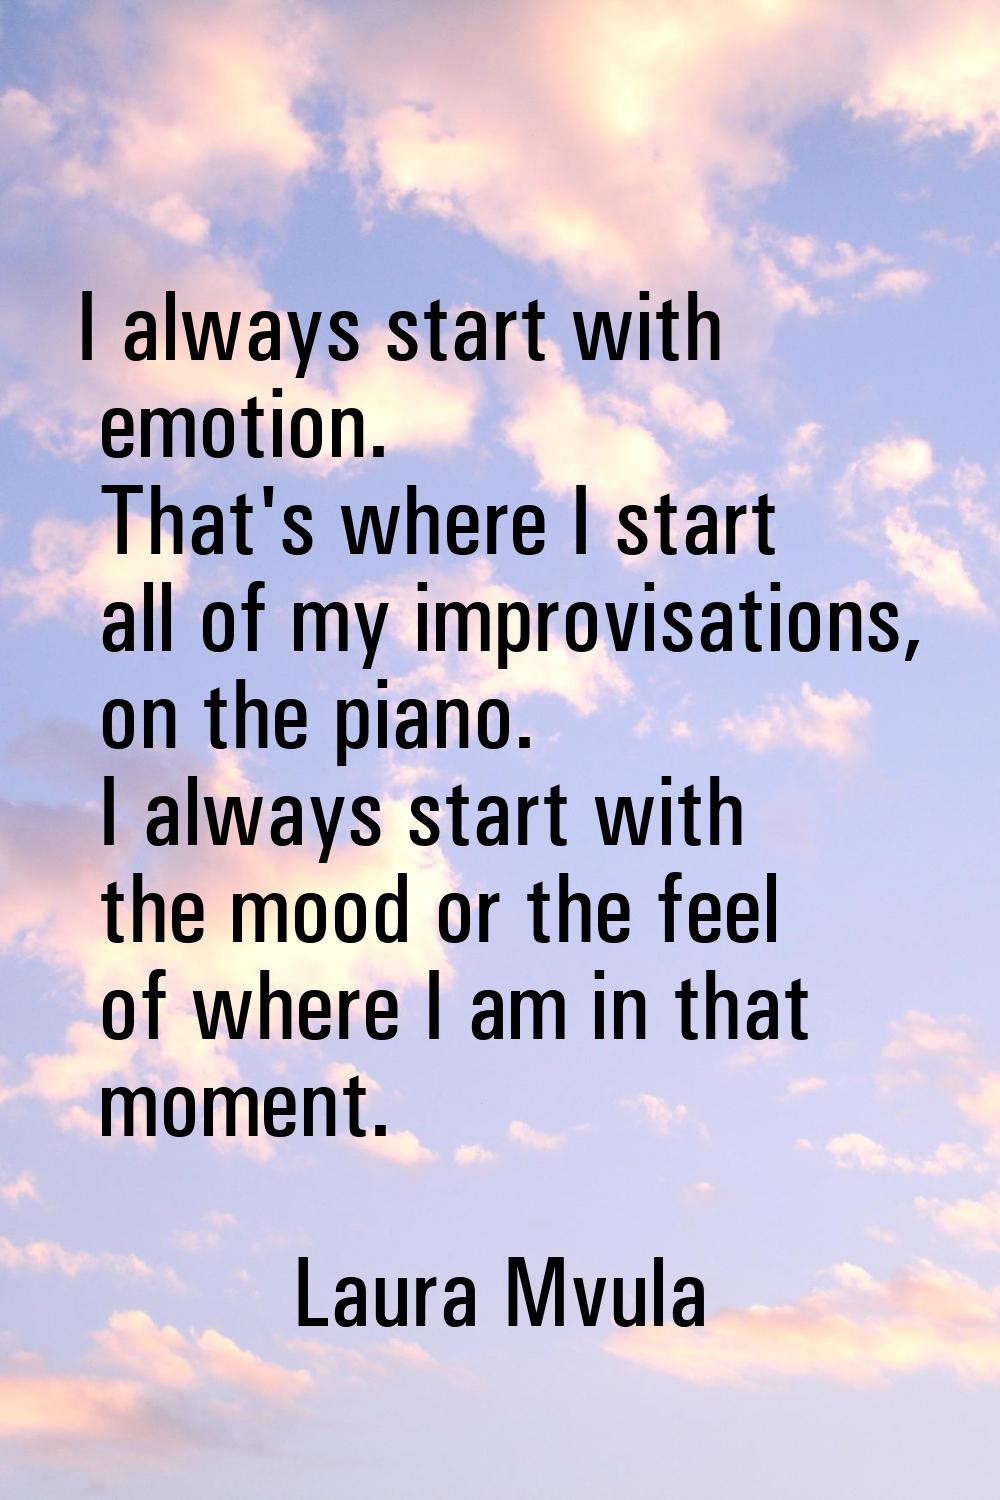 I always start with emotion. That's where I start all of my improvisations, on the piano. I always 